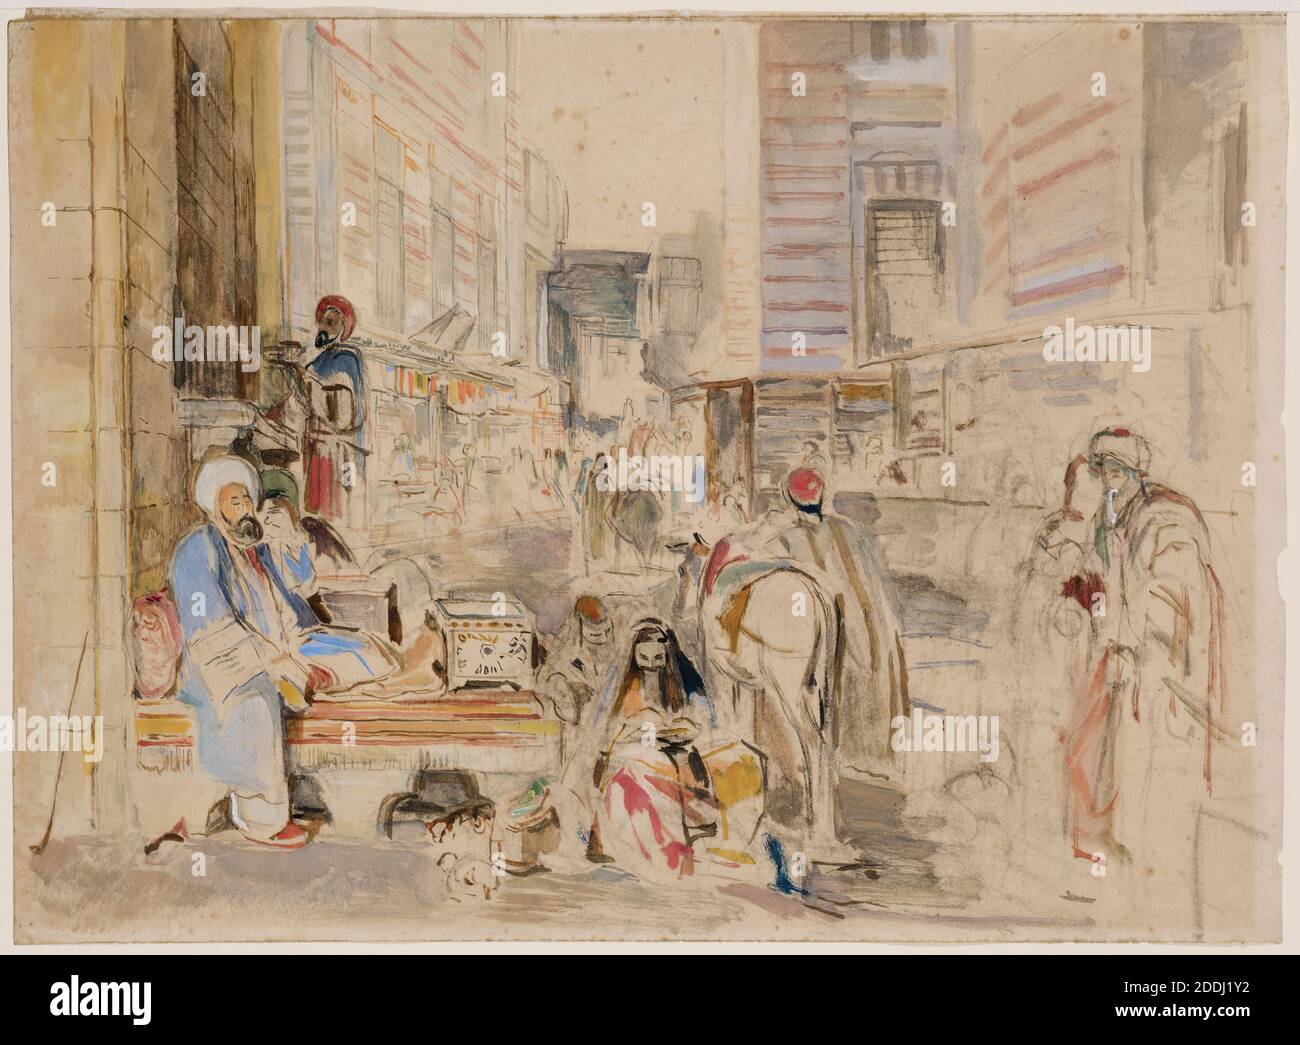 Study For Street And Mosque of the Ghoreyah, Cairo, 1841-51 John Frederick Lewis, Watercolour, Egypt, Street scene Stock Photo